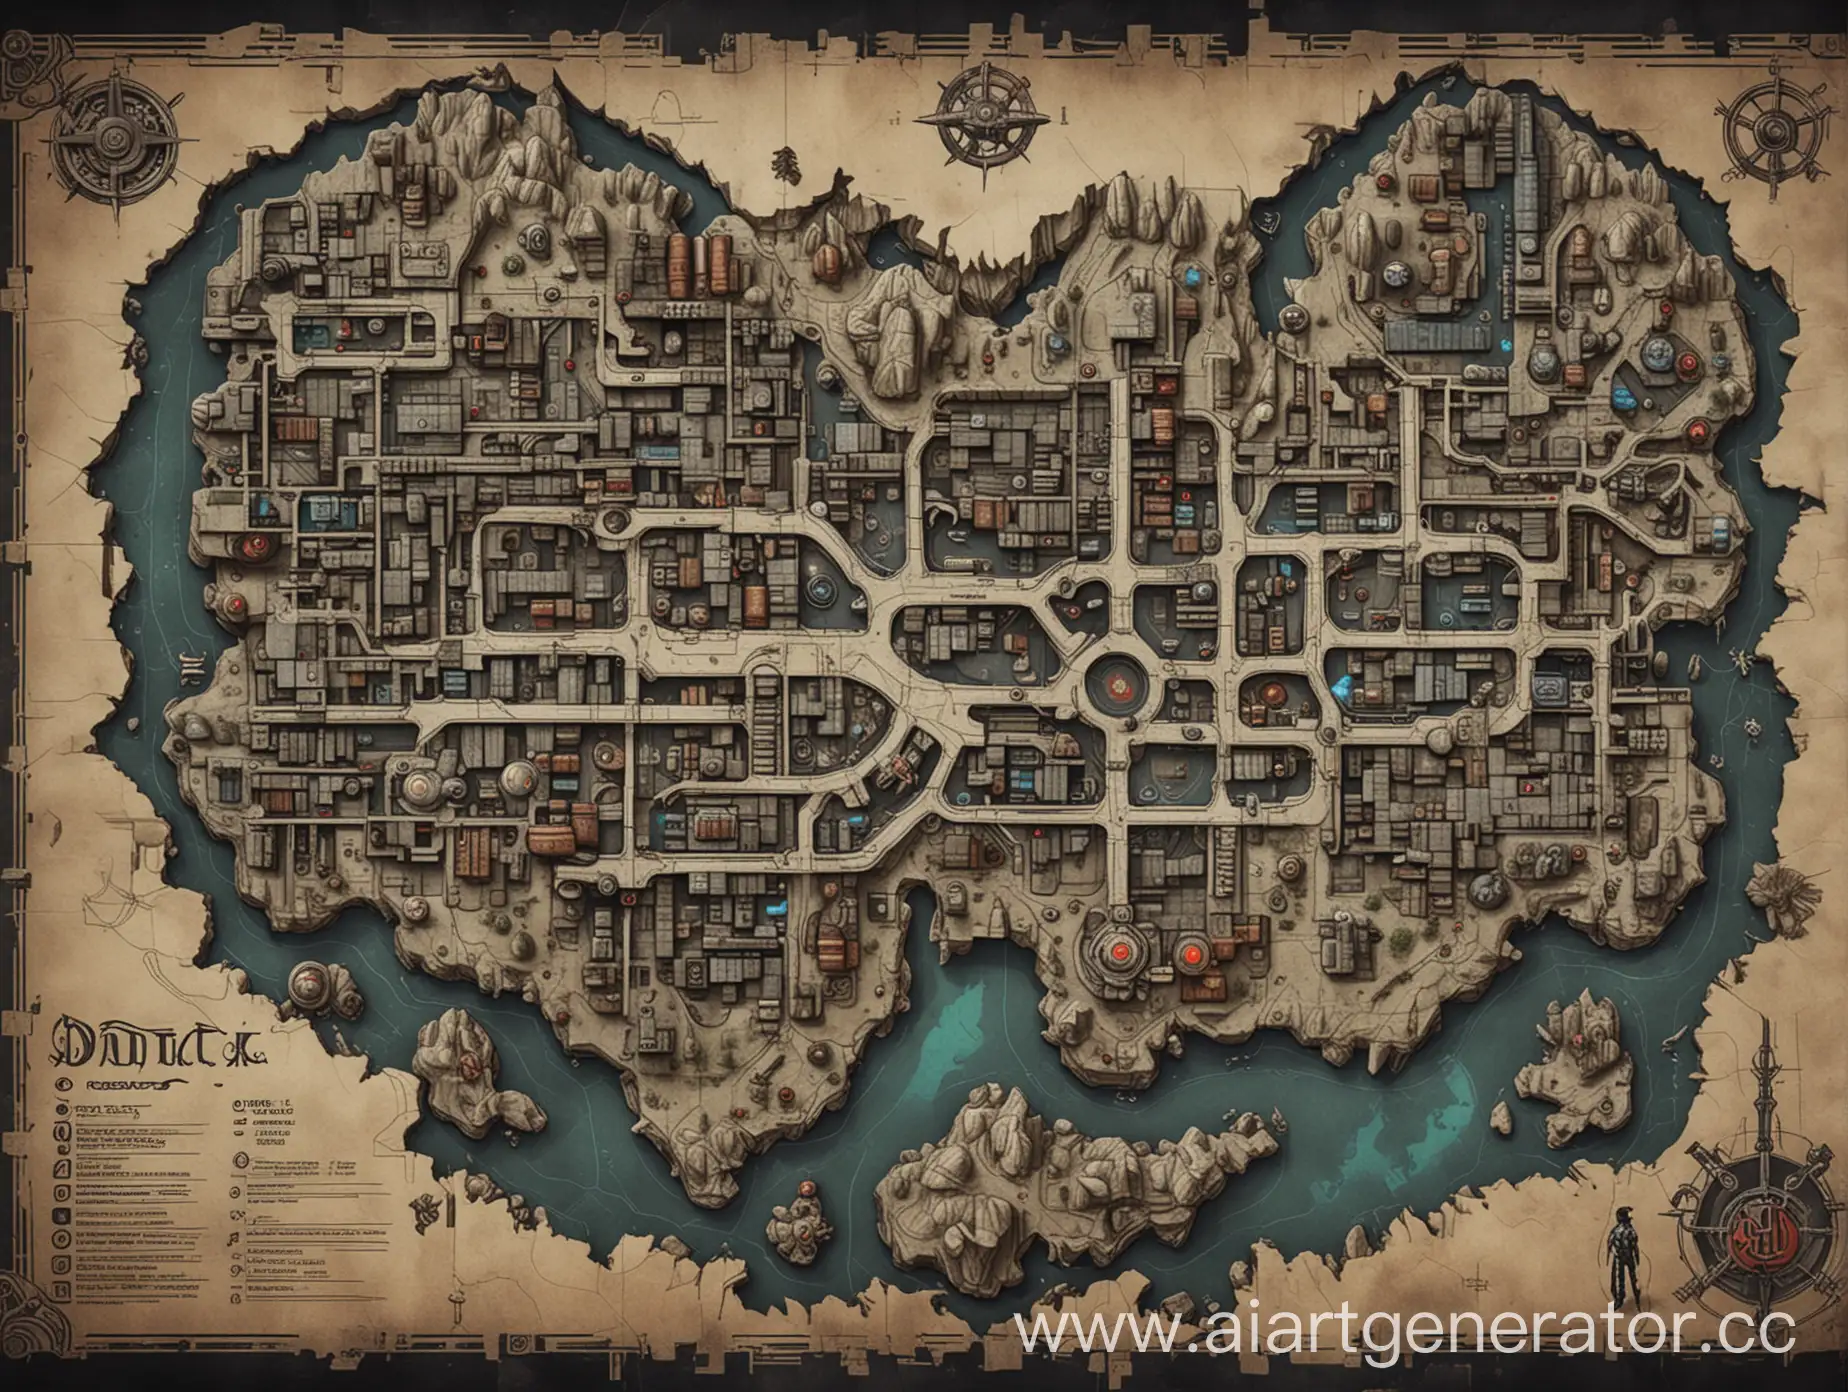 Cyberpunk-Dungeons-and-Dragons-Map-with-Futuristic-Cityscapes-and-Neon-Lighting